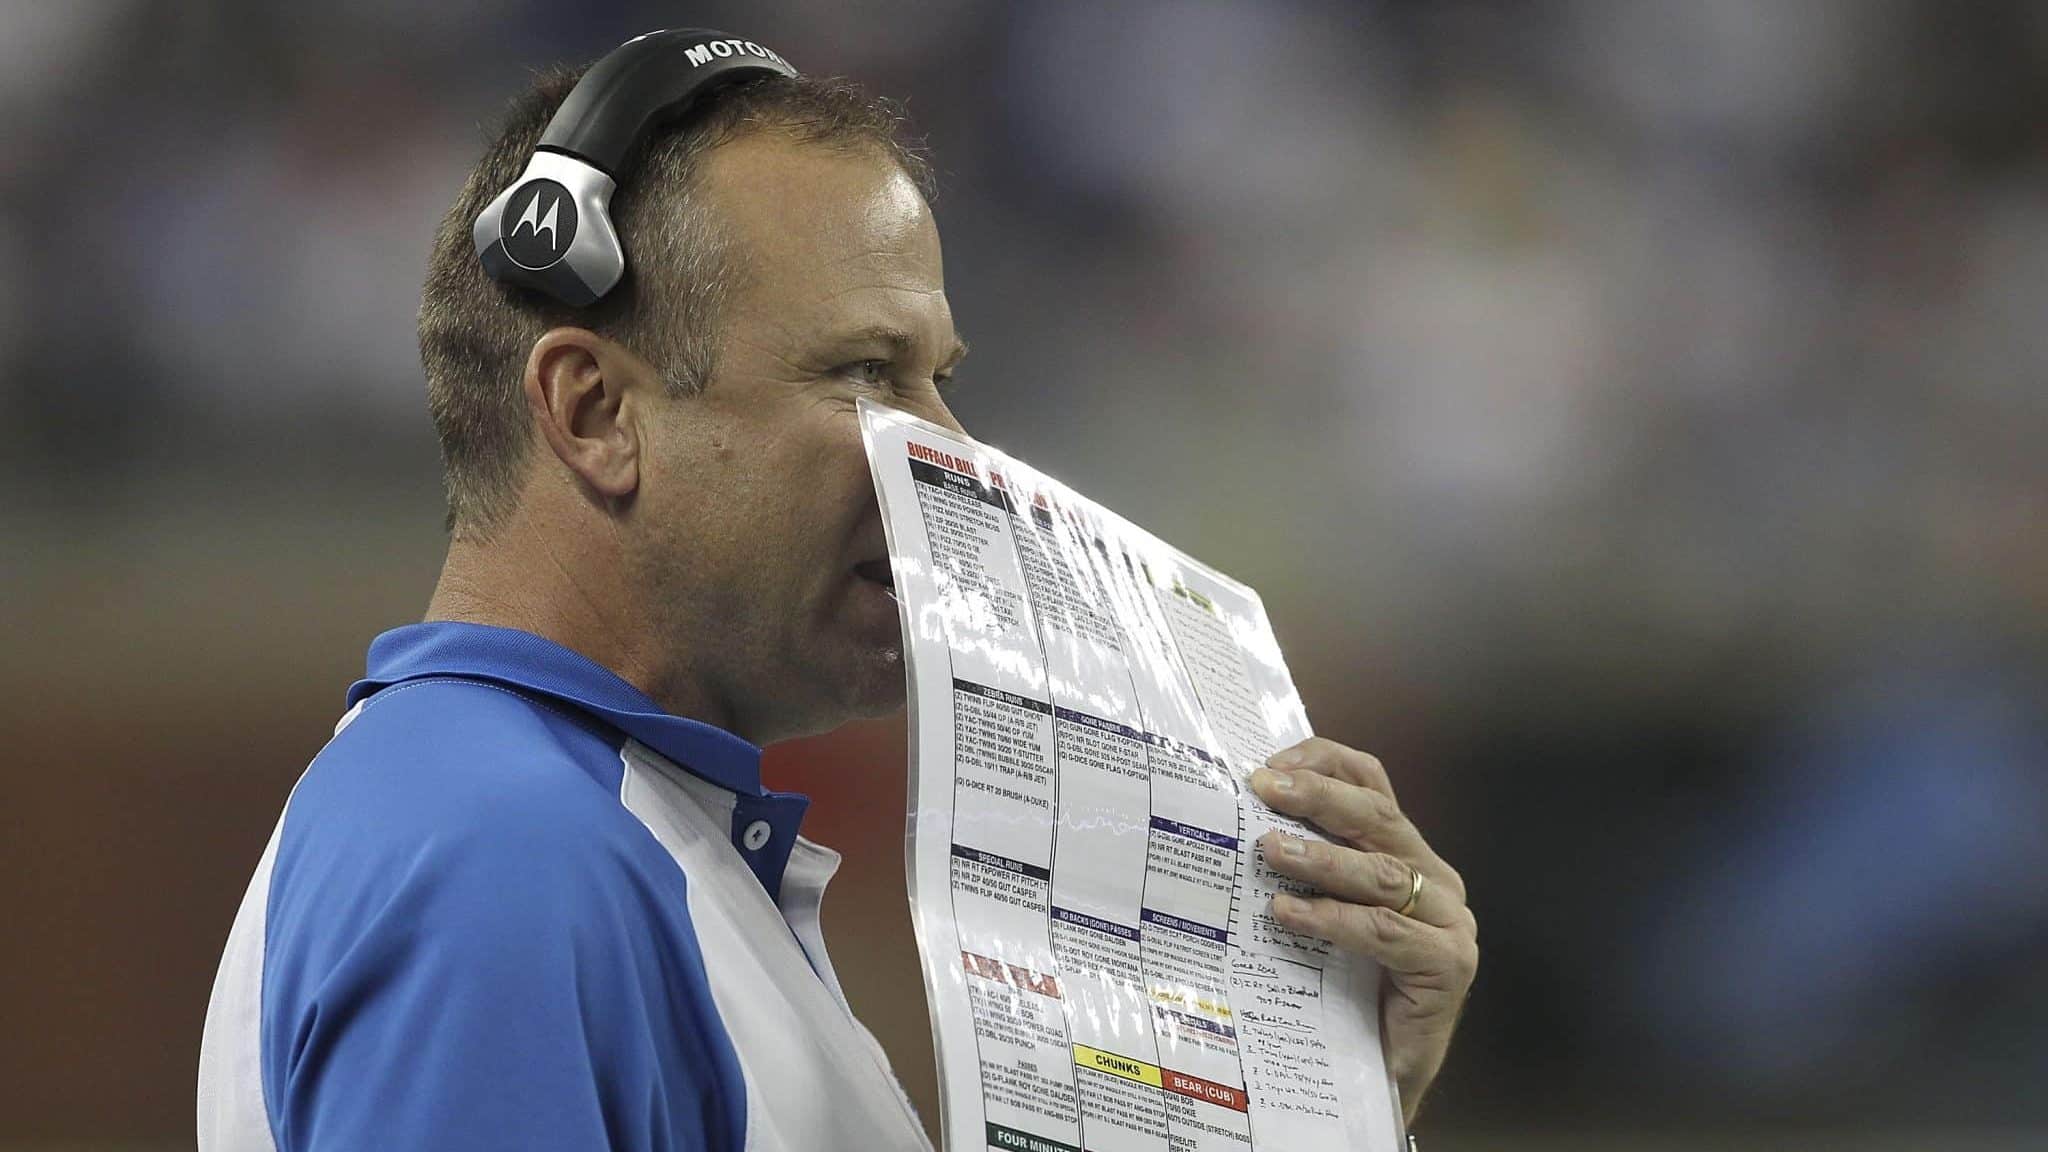 DETROIT - SEPTEMBER 02: Detroit Lions offensive coordinator Scott Linehan calls the plays during the fourth quarter of the preseason game at Ford Field on September 2, 2010 in Detroit, Michigan. The Lions defeated the Bills 28-23.